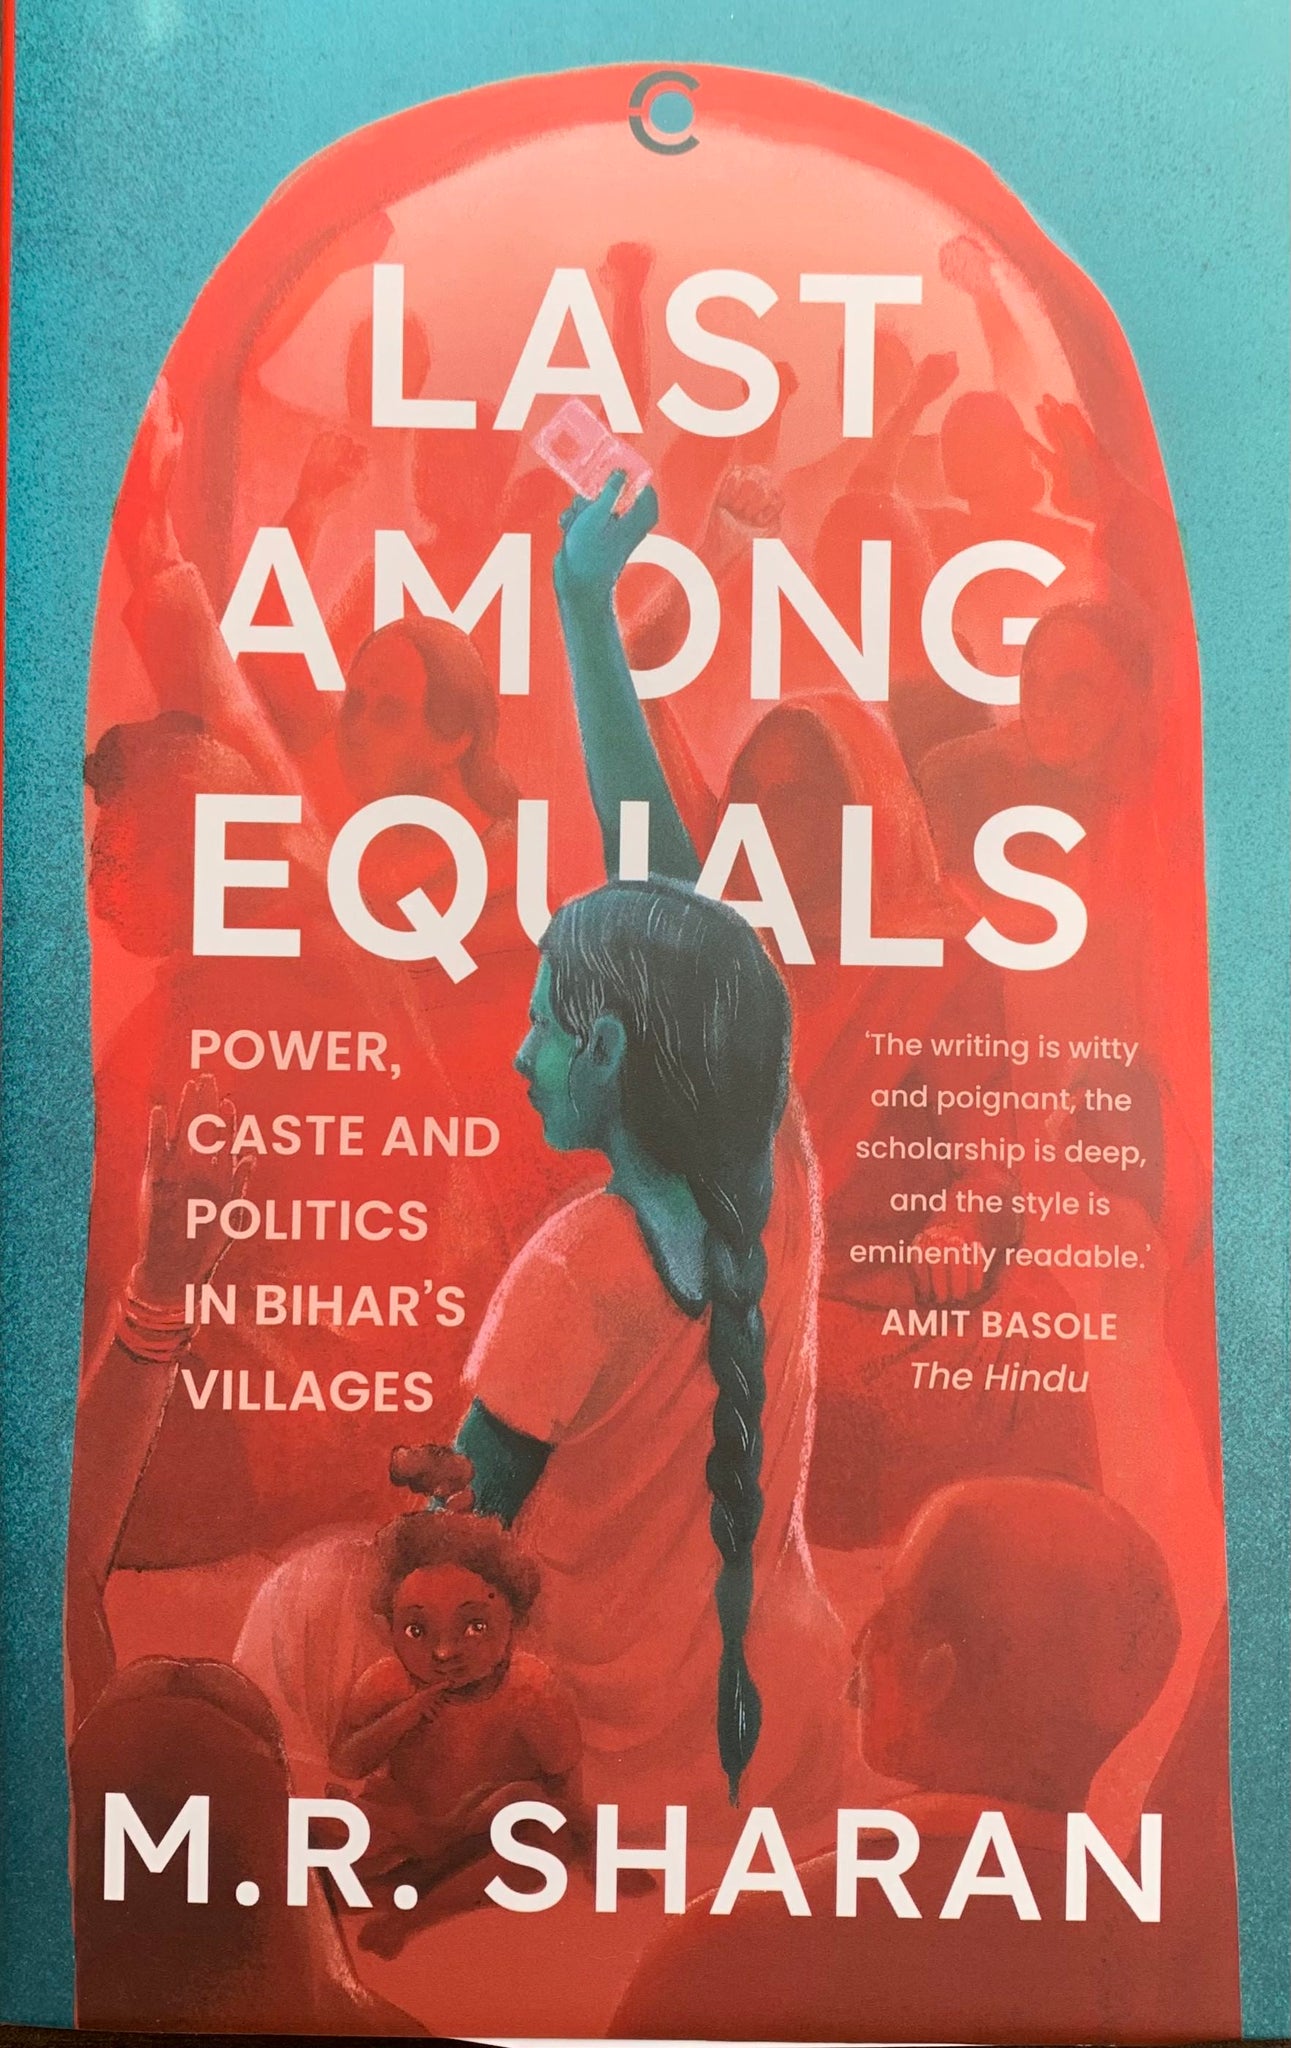 Last Among Equals: Power, Caste And Politics In Bihar’s Villages